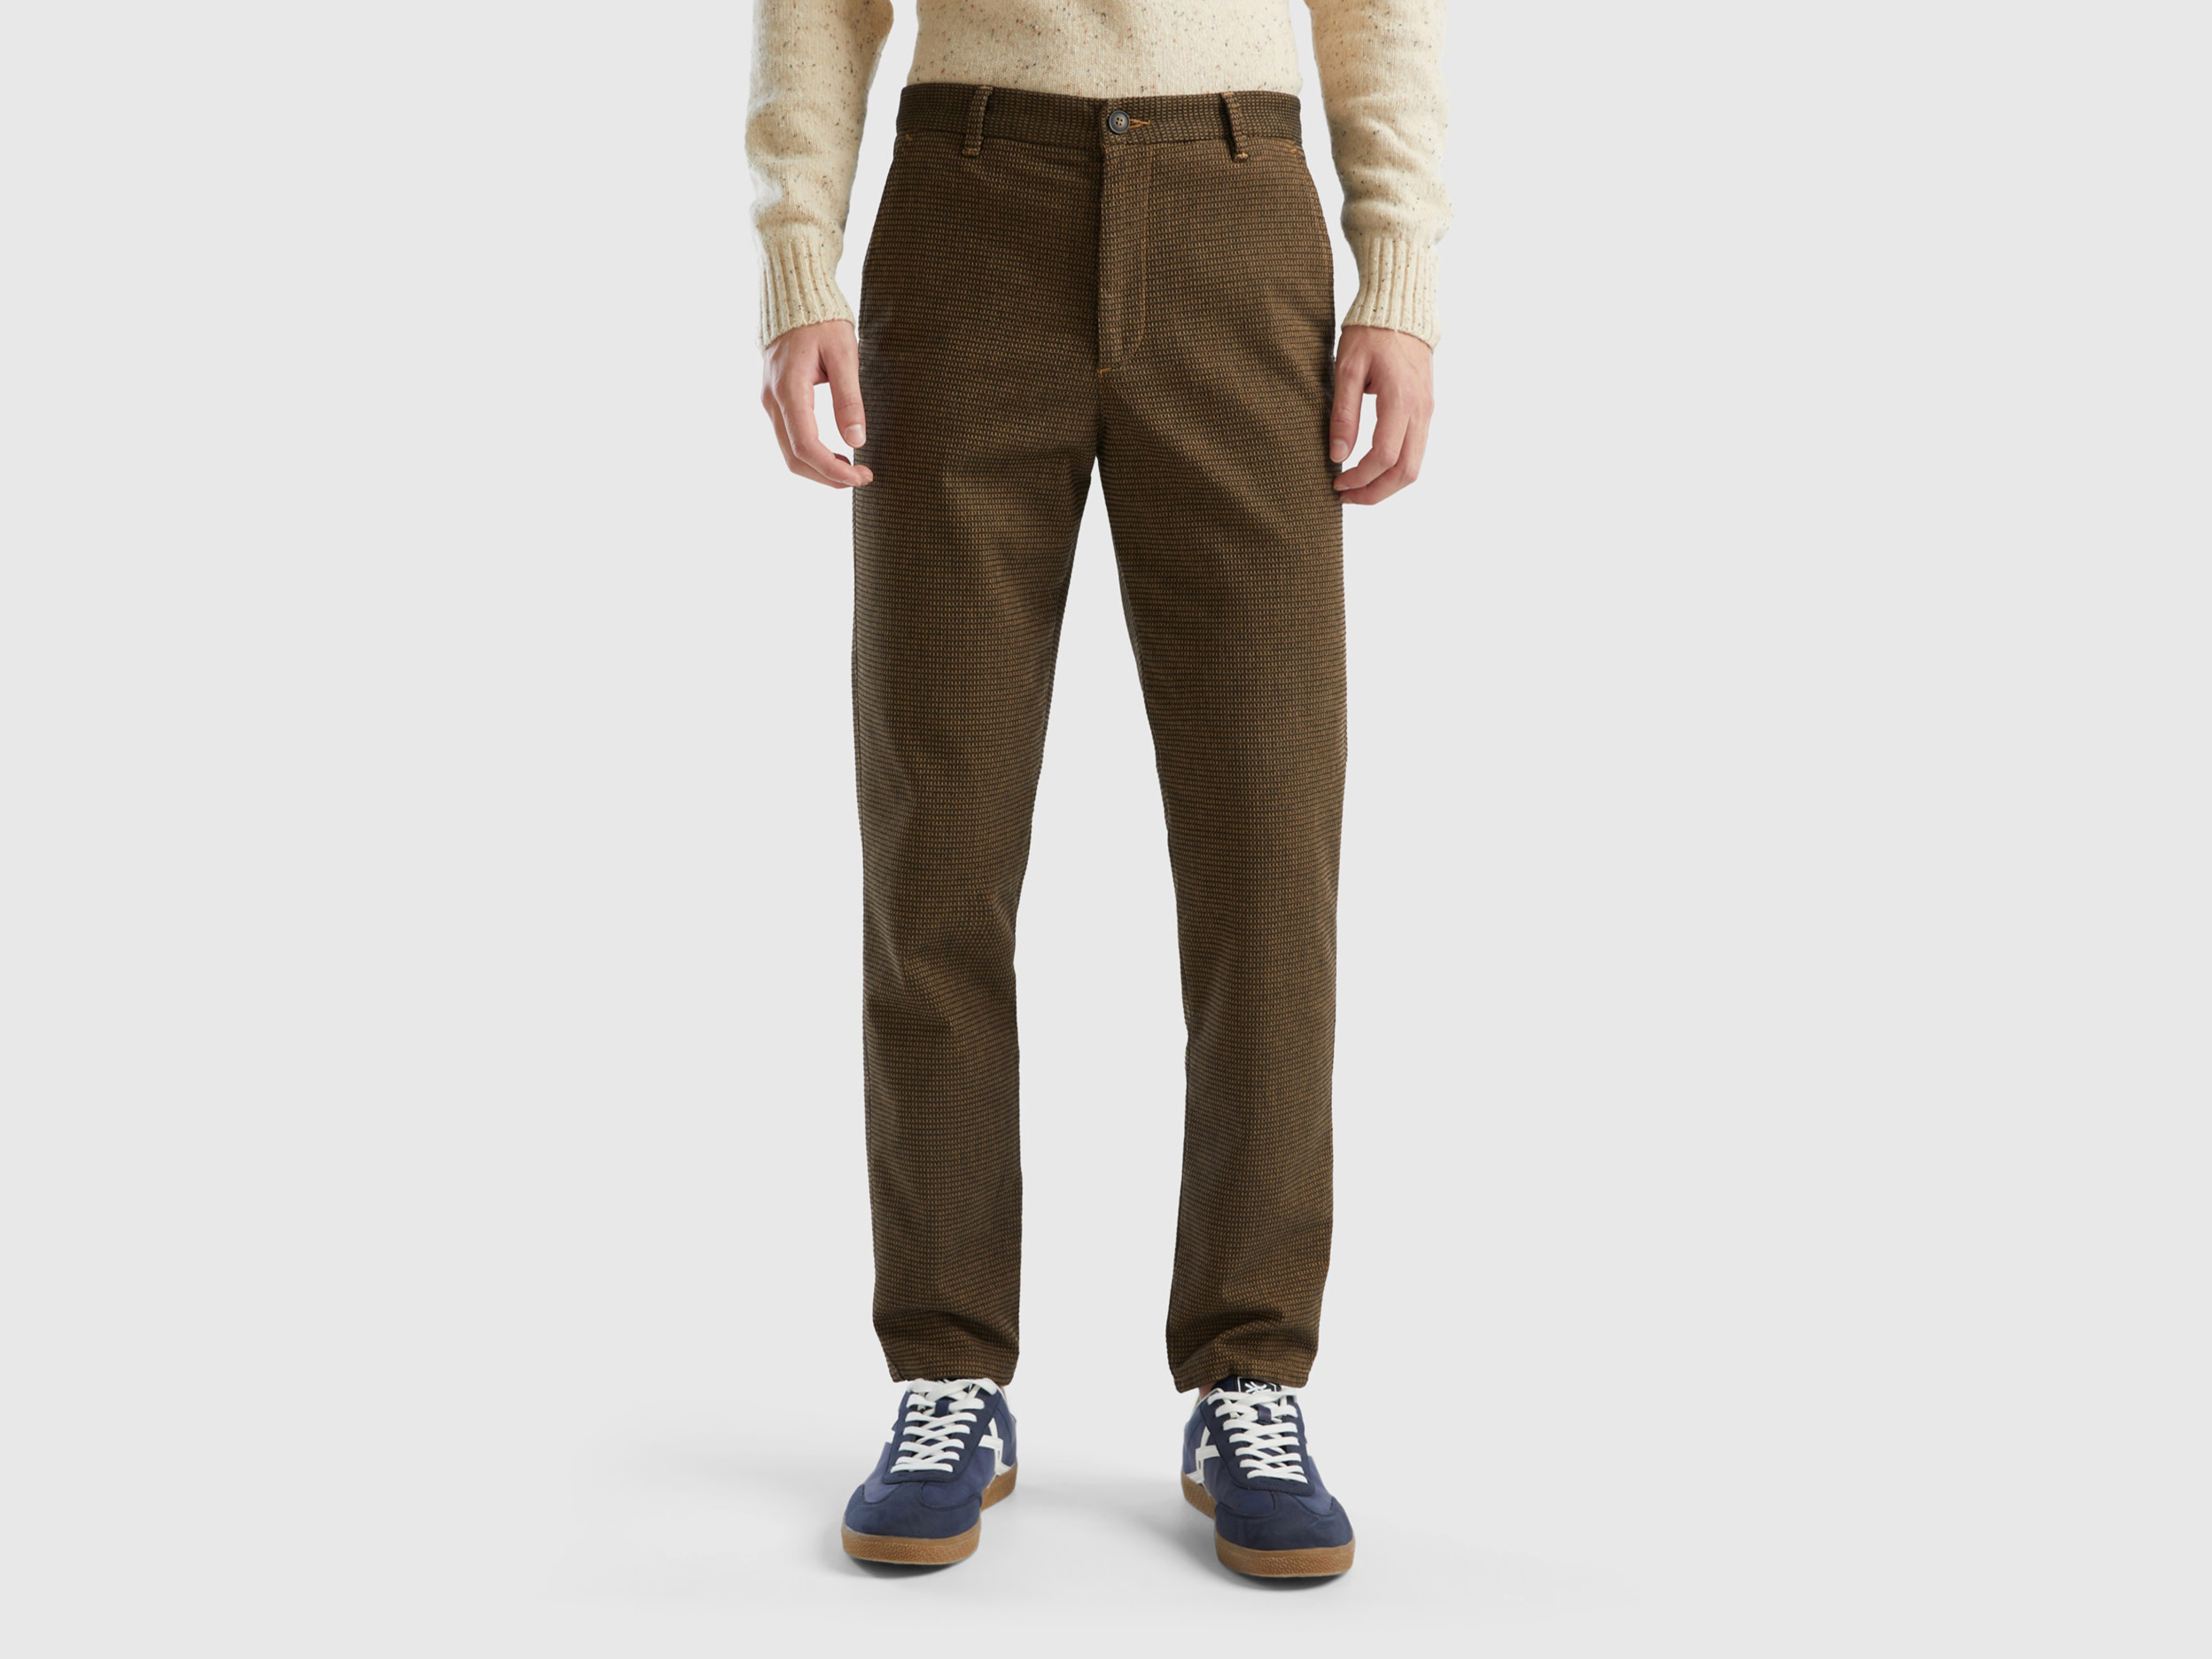 Benetton, Slim Fit Chinos With Dropped Crotch, size 48, Brown, Men